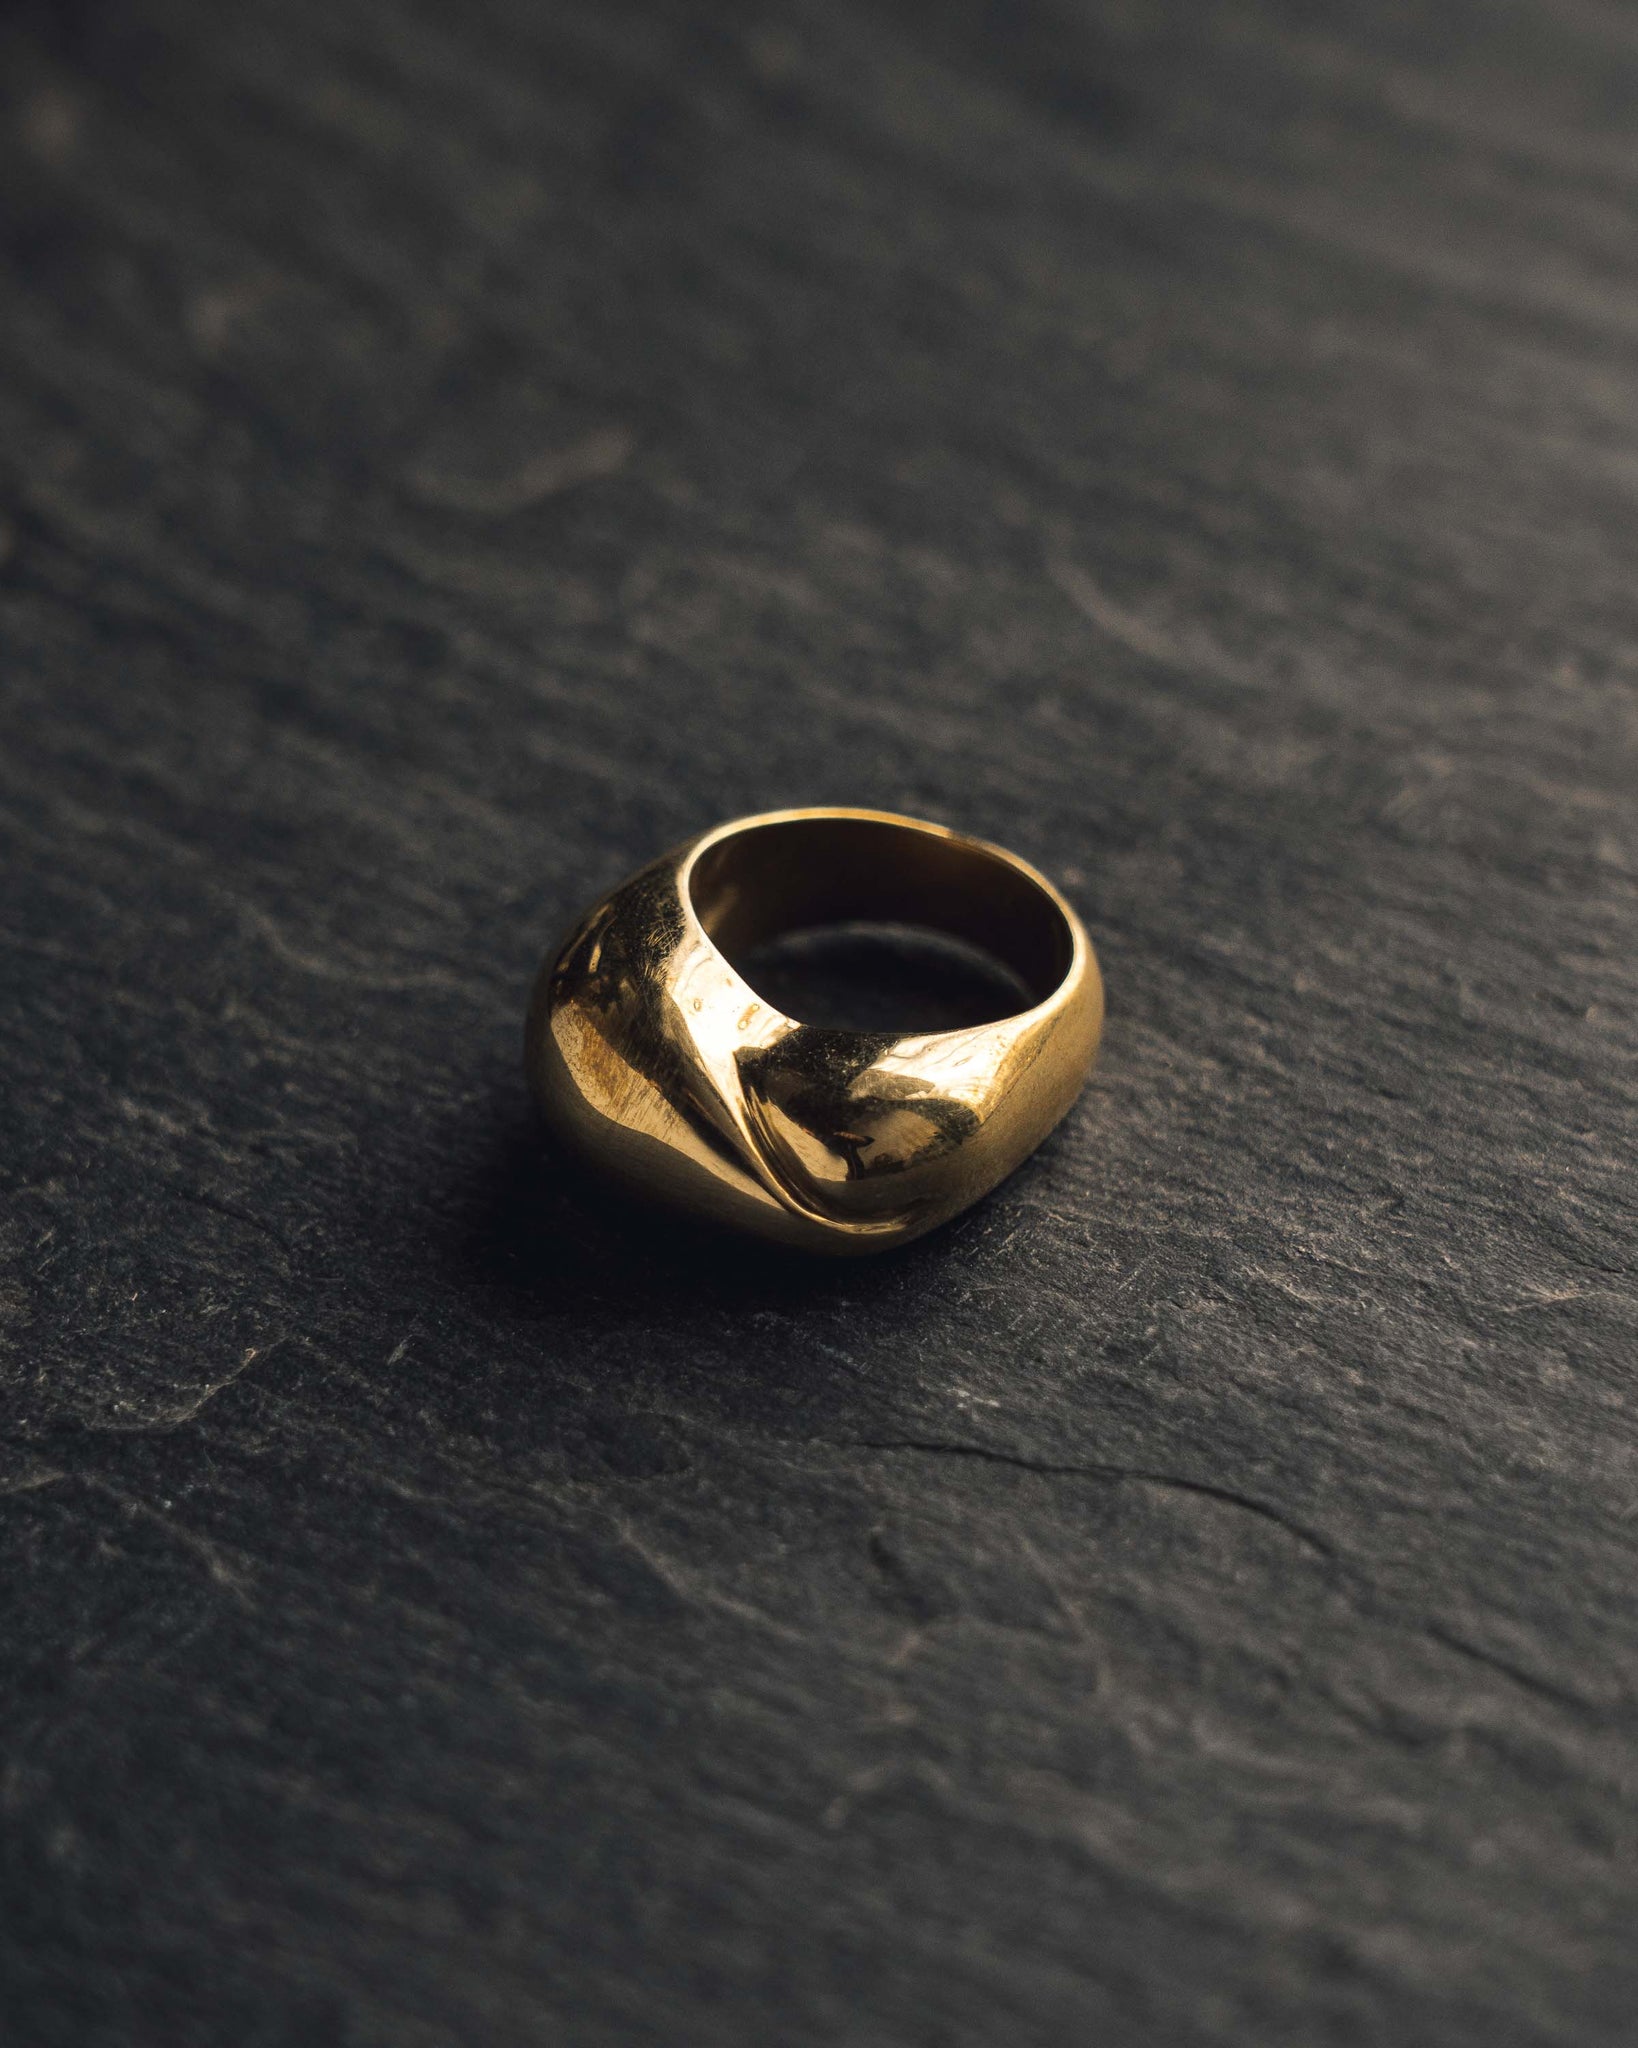 Infinity Sign Of The Rings Wedding Rings On A Yellow Backgroundwedding  Bands Stock Photo - Download Image Now - iStock